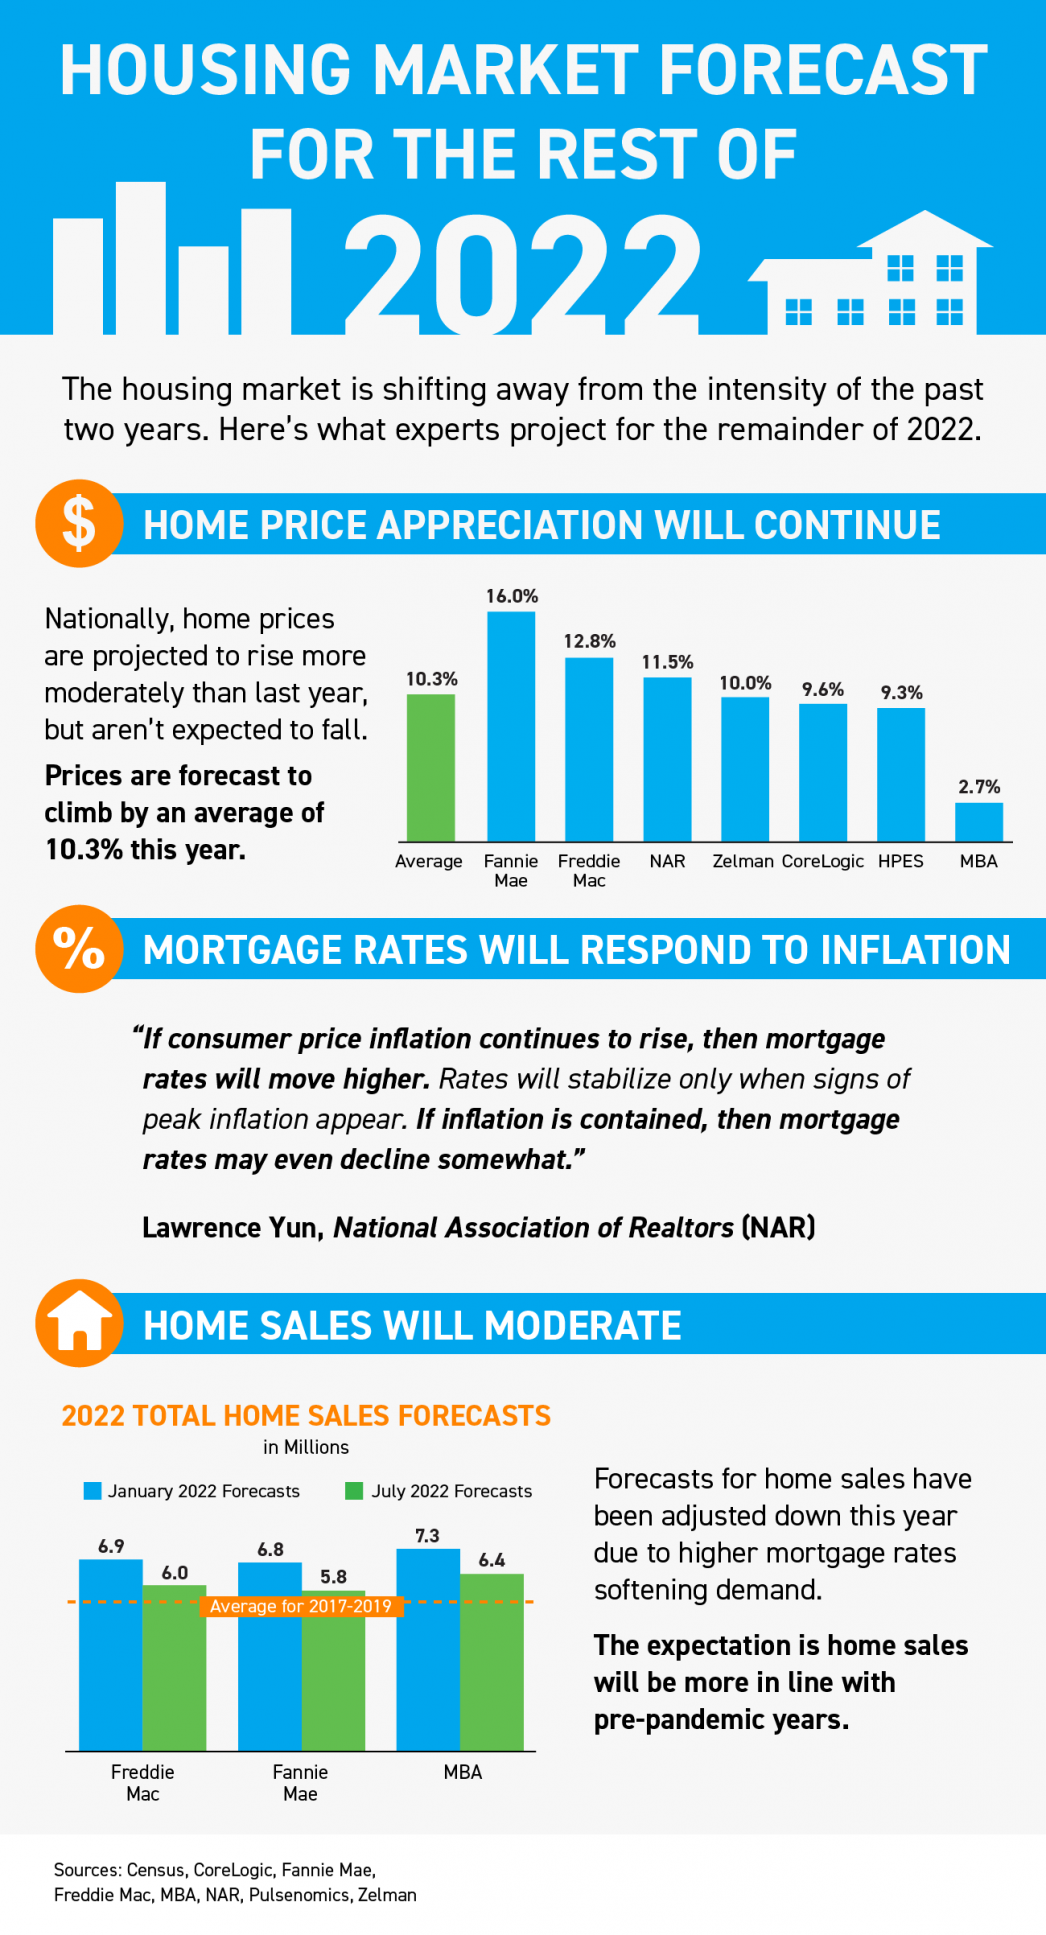 Housing Market Forecast for the Rest of 2022 - INFOGRAPHIC] - KM Realty Group LLC Chicago